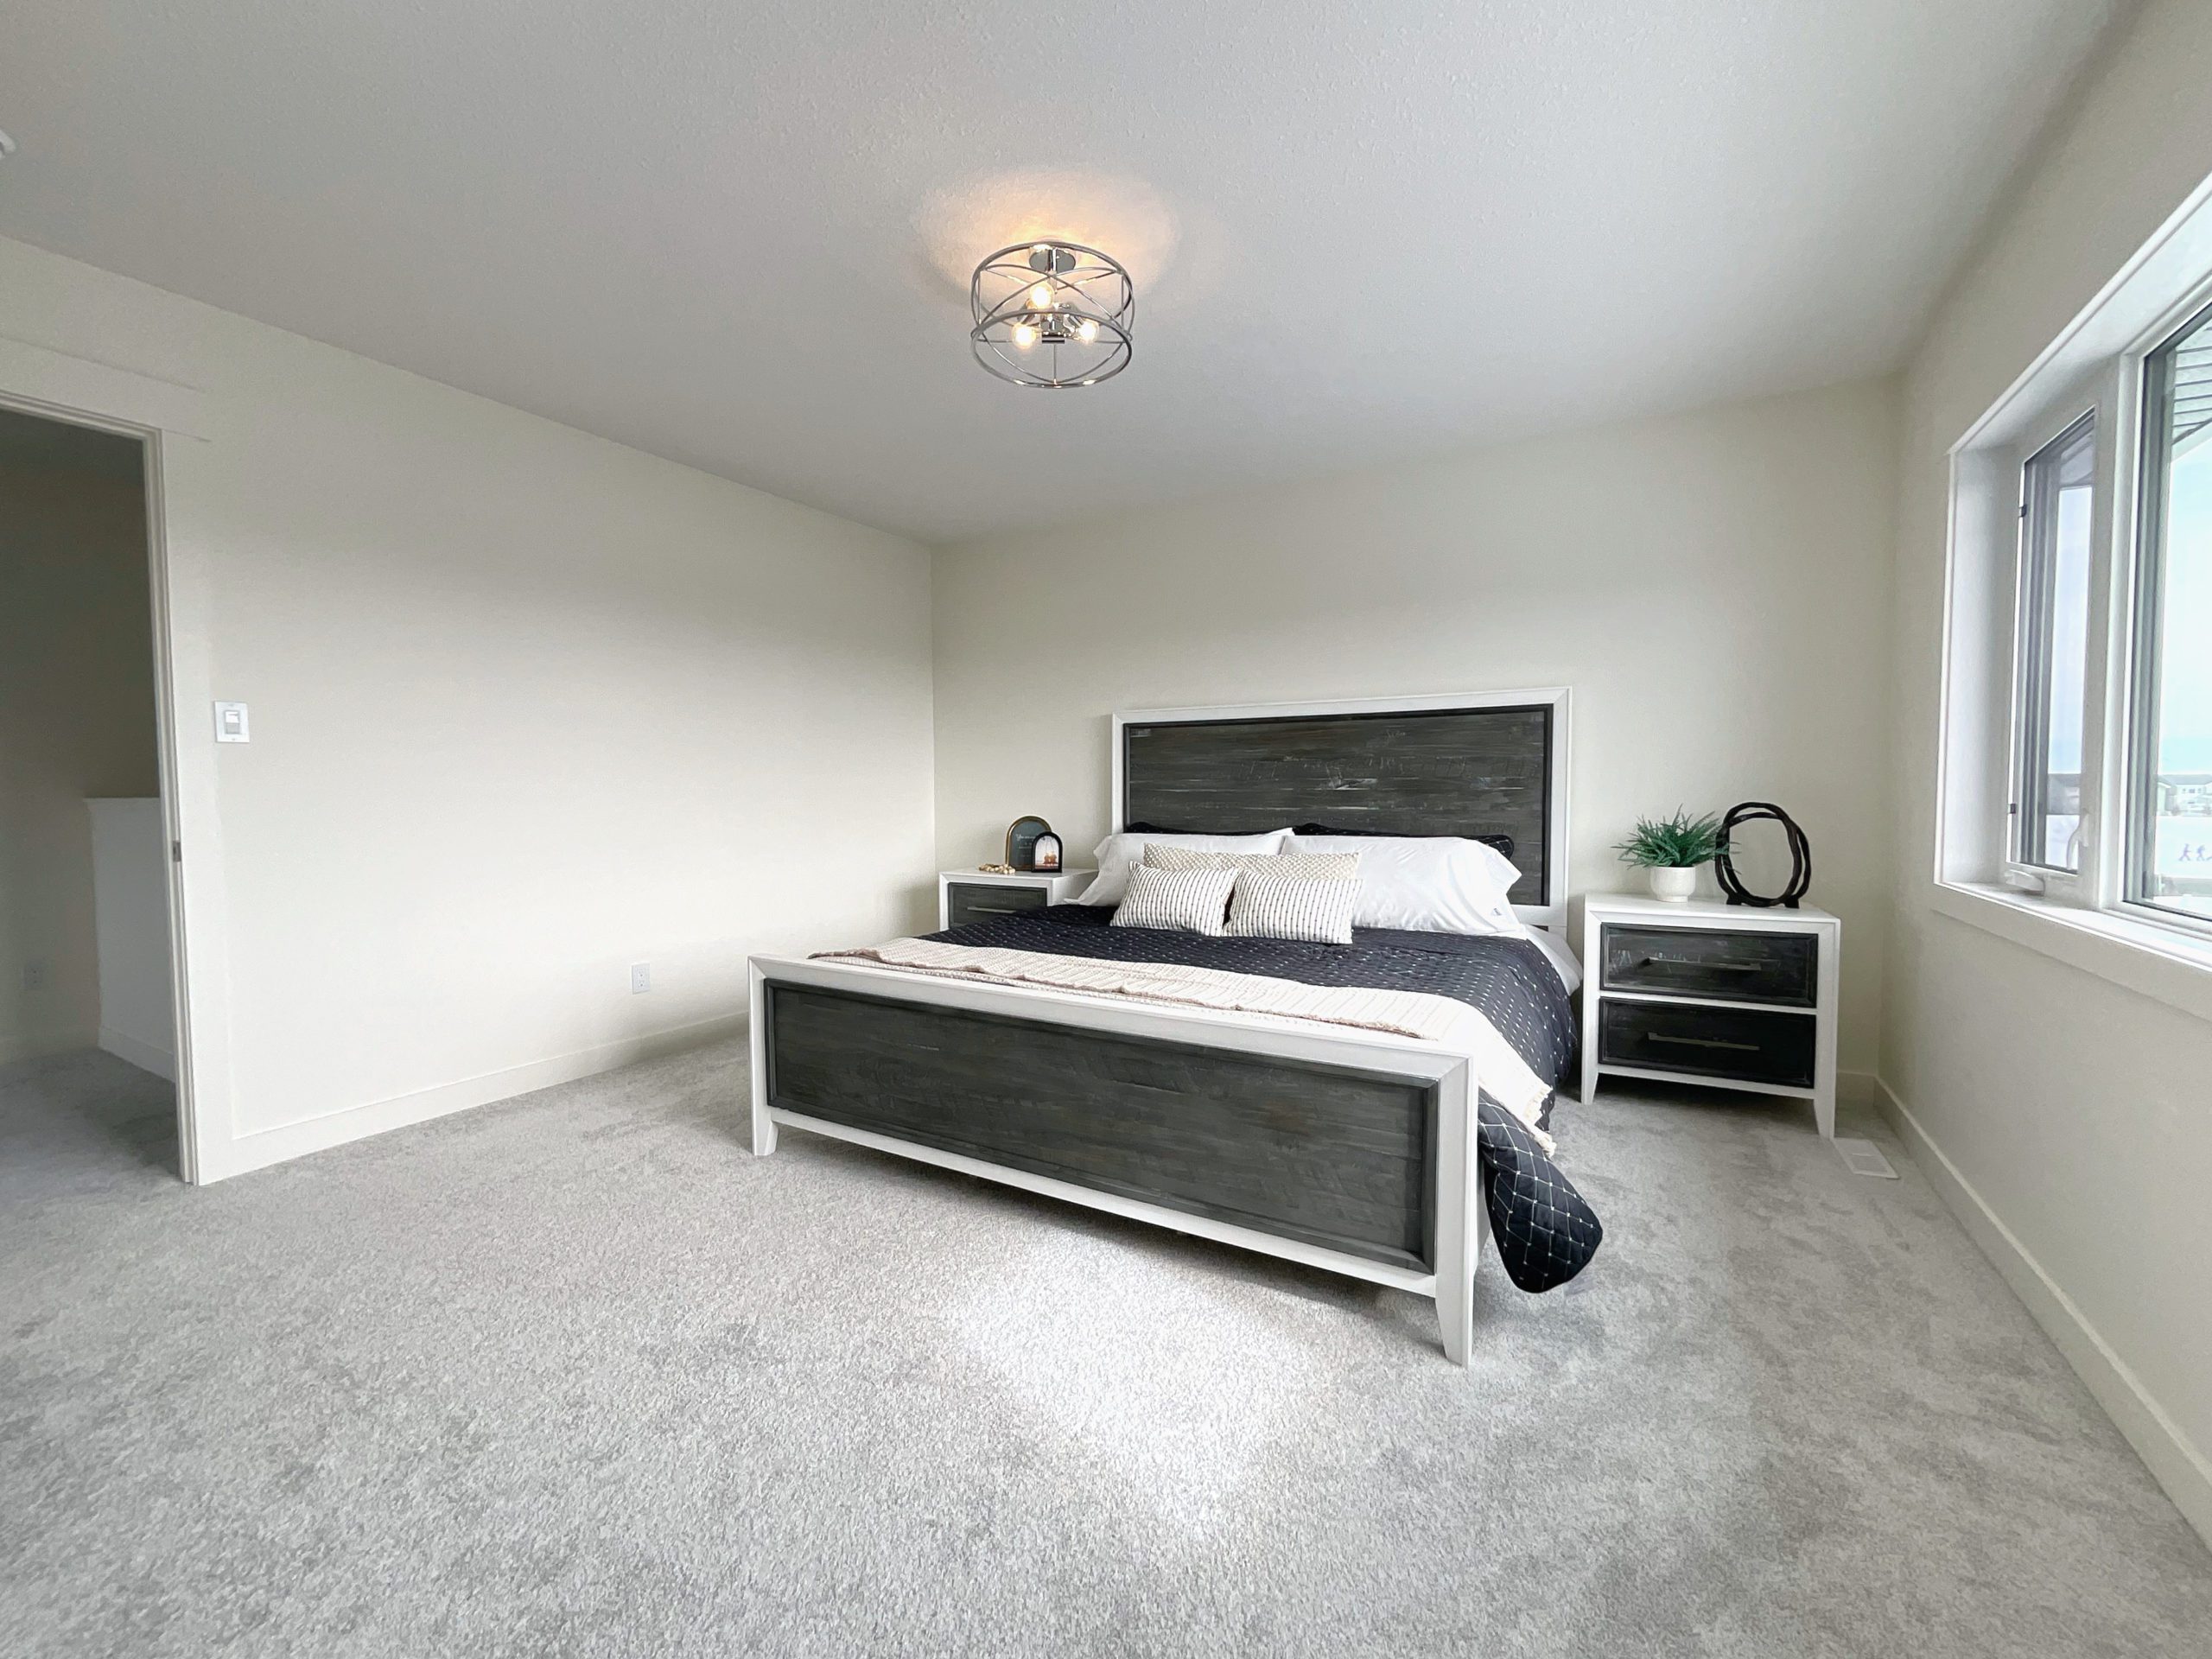 A primary bedroom with a king bed, nightstands, semi-flush light fixture and a large window.